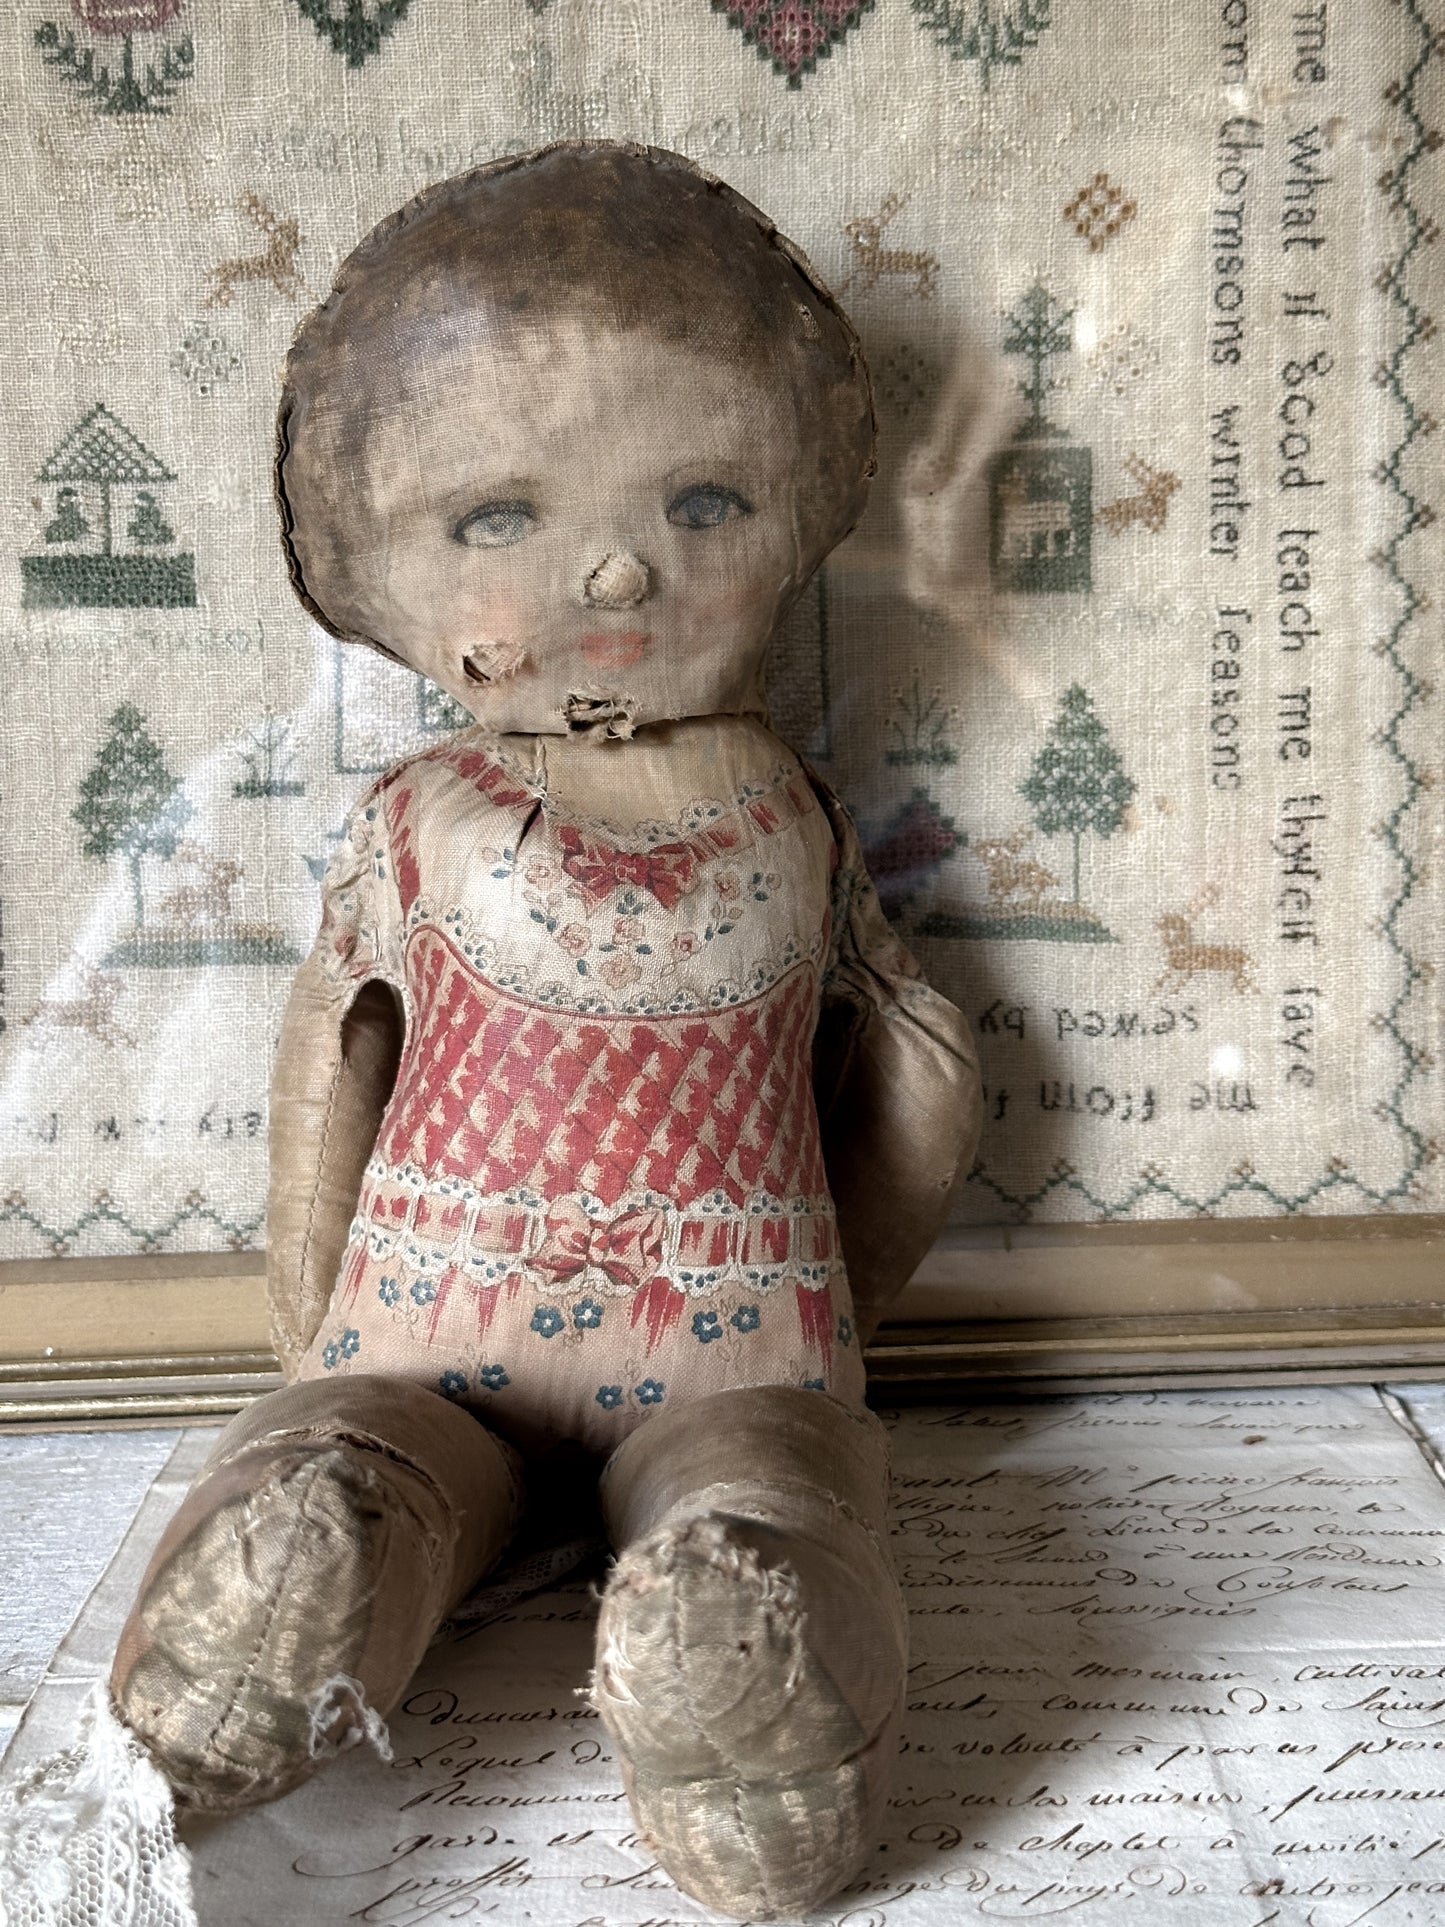 Gorgeous early Dean’s Rag book printed doll with pink flowers